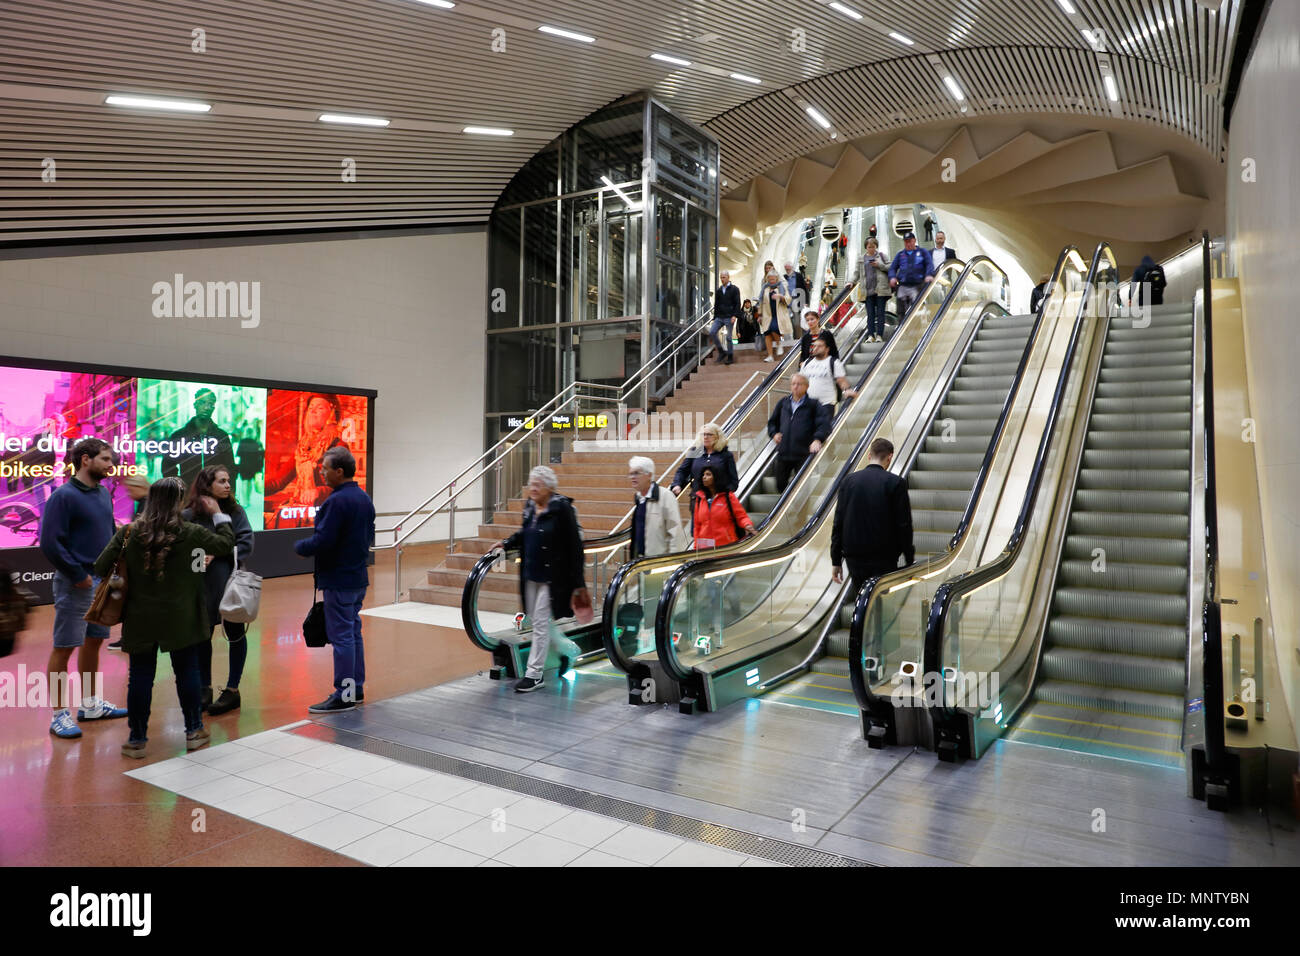 Stockholm, Sweden - August 8, 2017: People at the indoor railroad station Stockholm City. Stock Photo